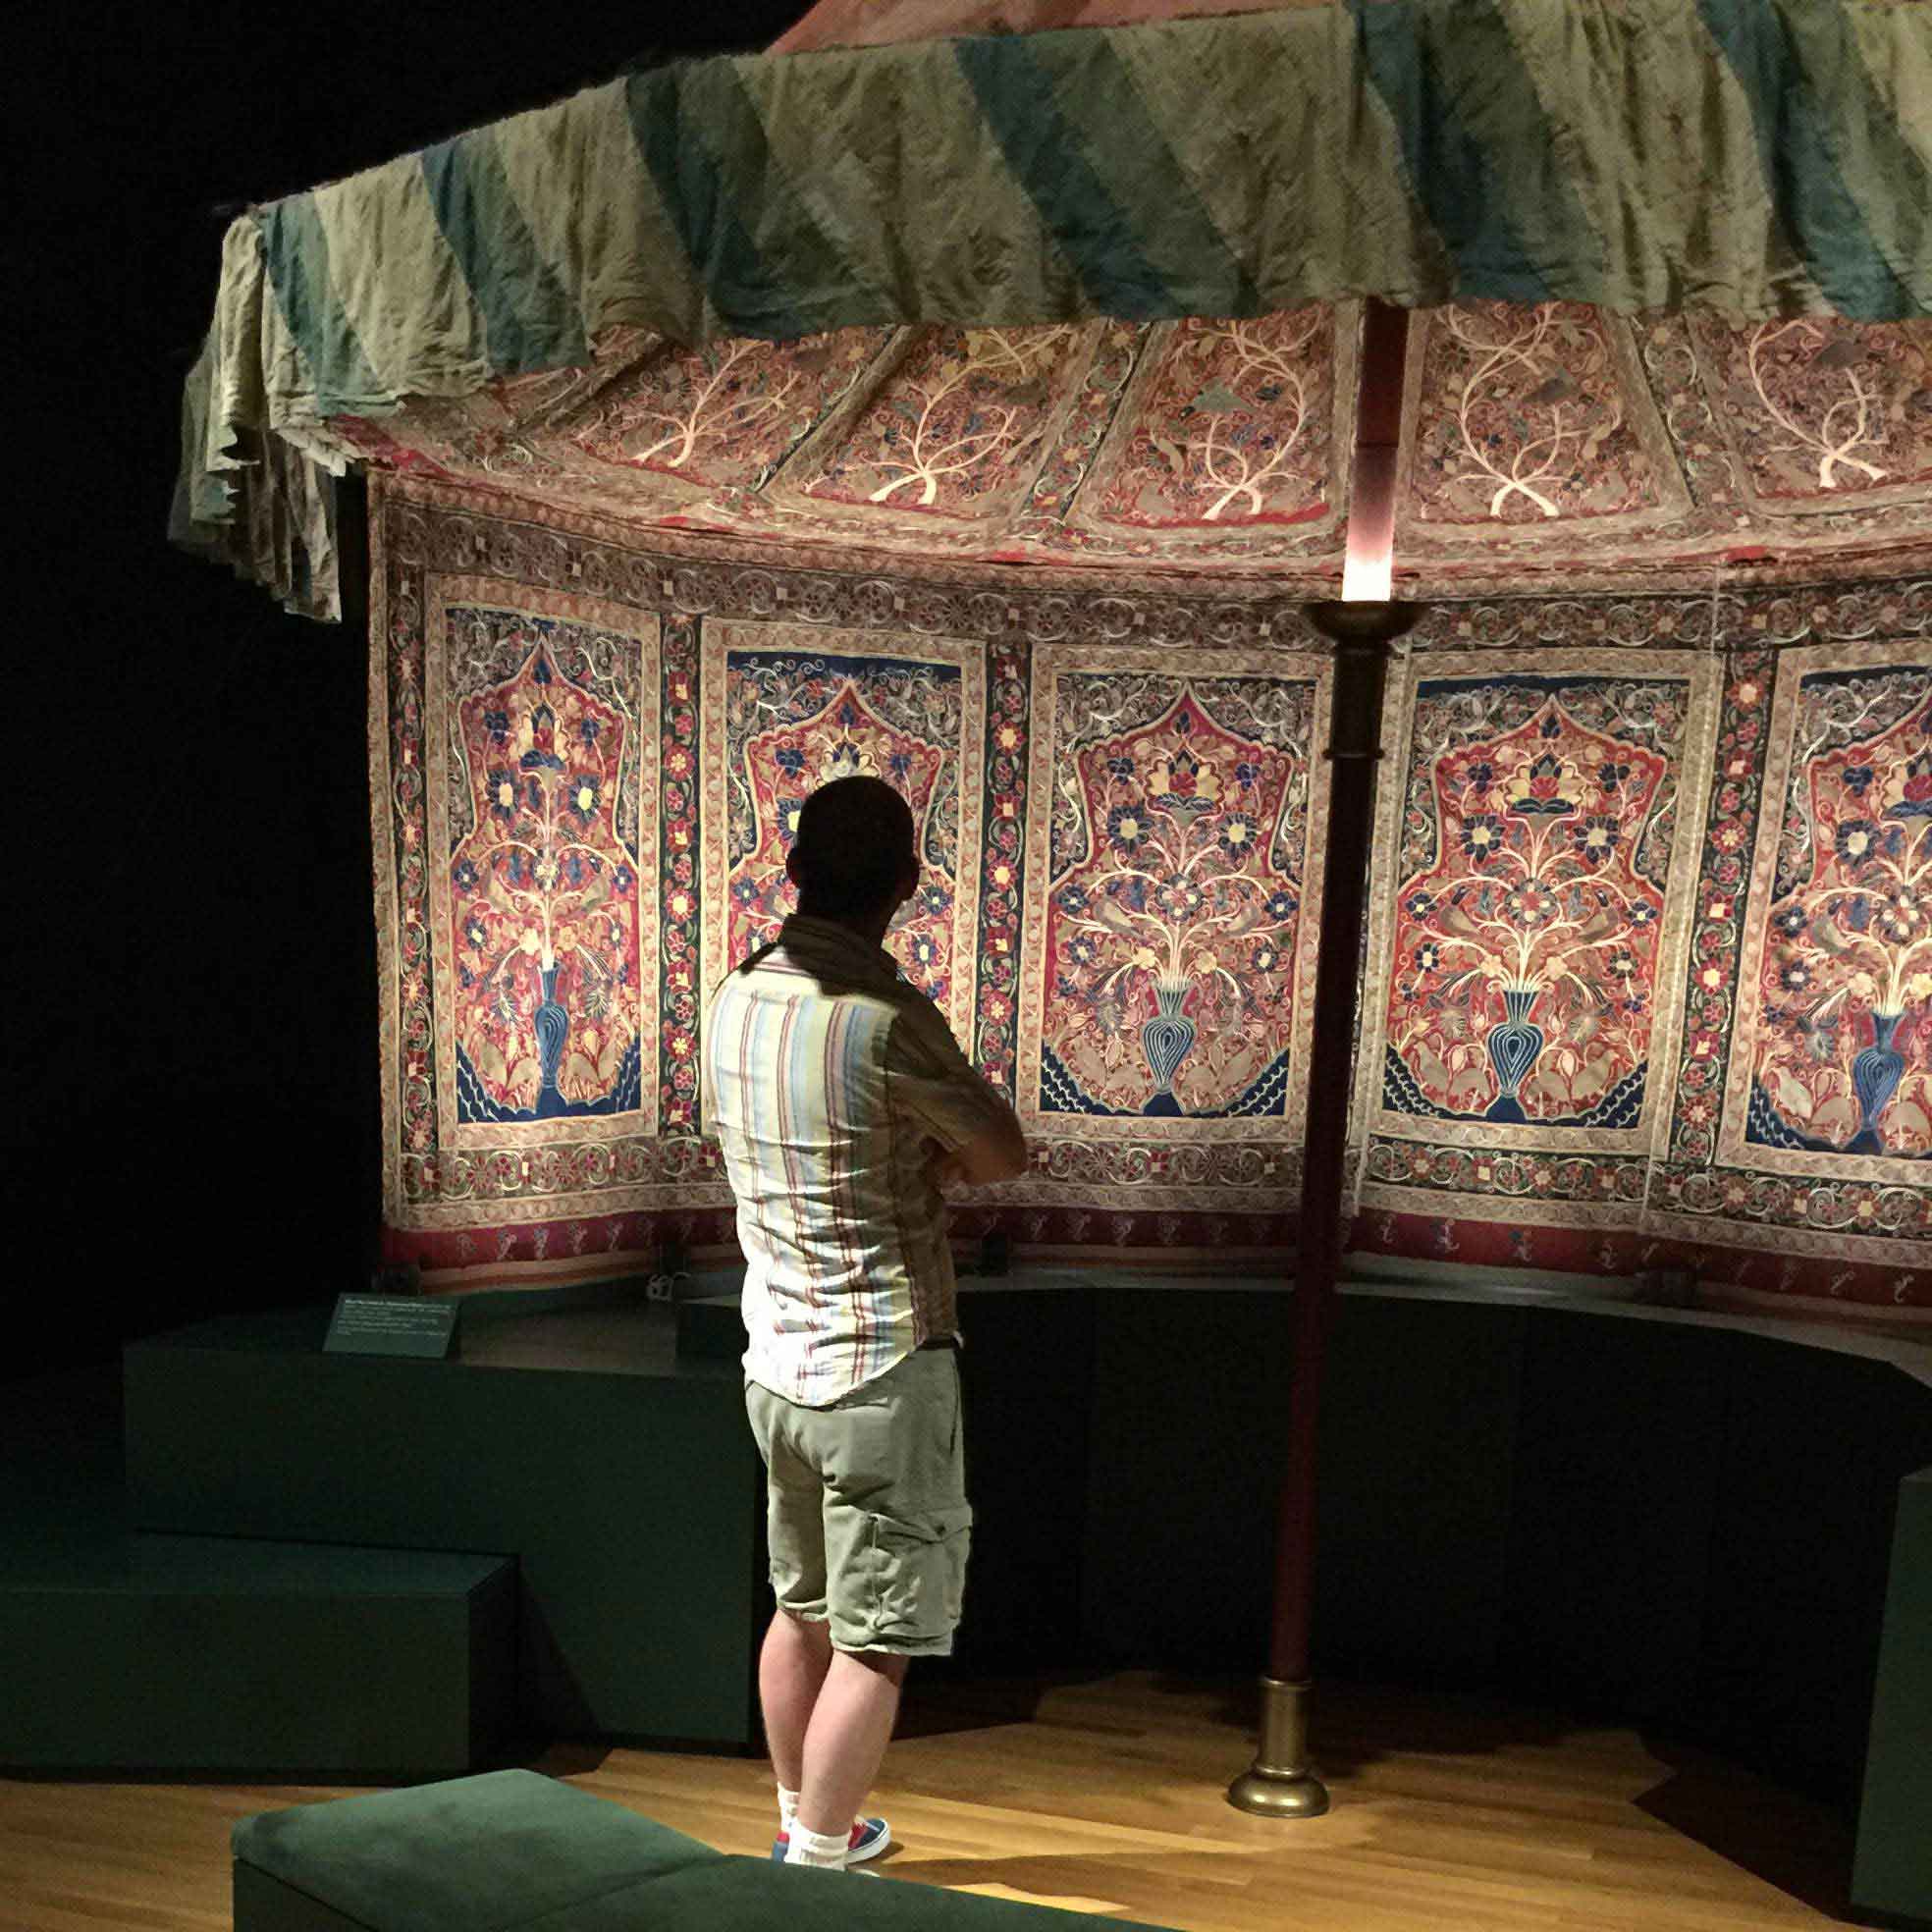 'Behold the Captivating Beauty' - The Ruggist viewing Muhammad Shah's Royal Persian Tent at The Cleveland Museum of Art | Image courtesy of Peter Kitchen